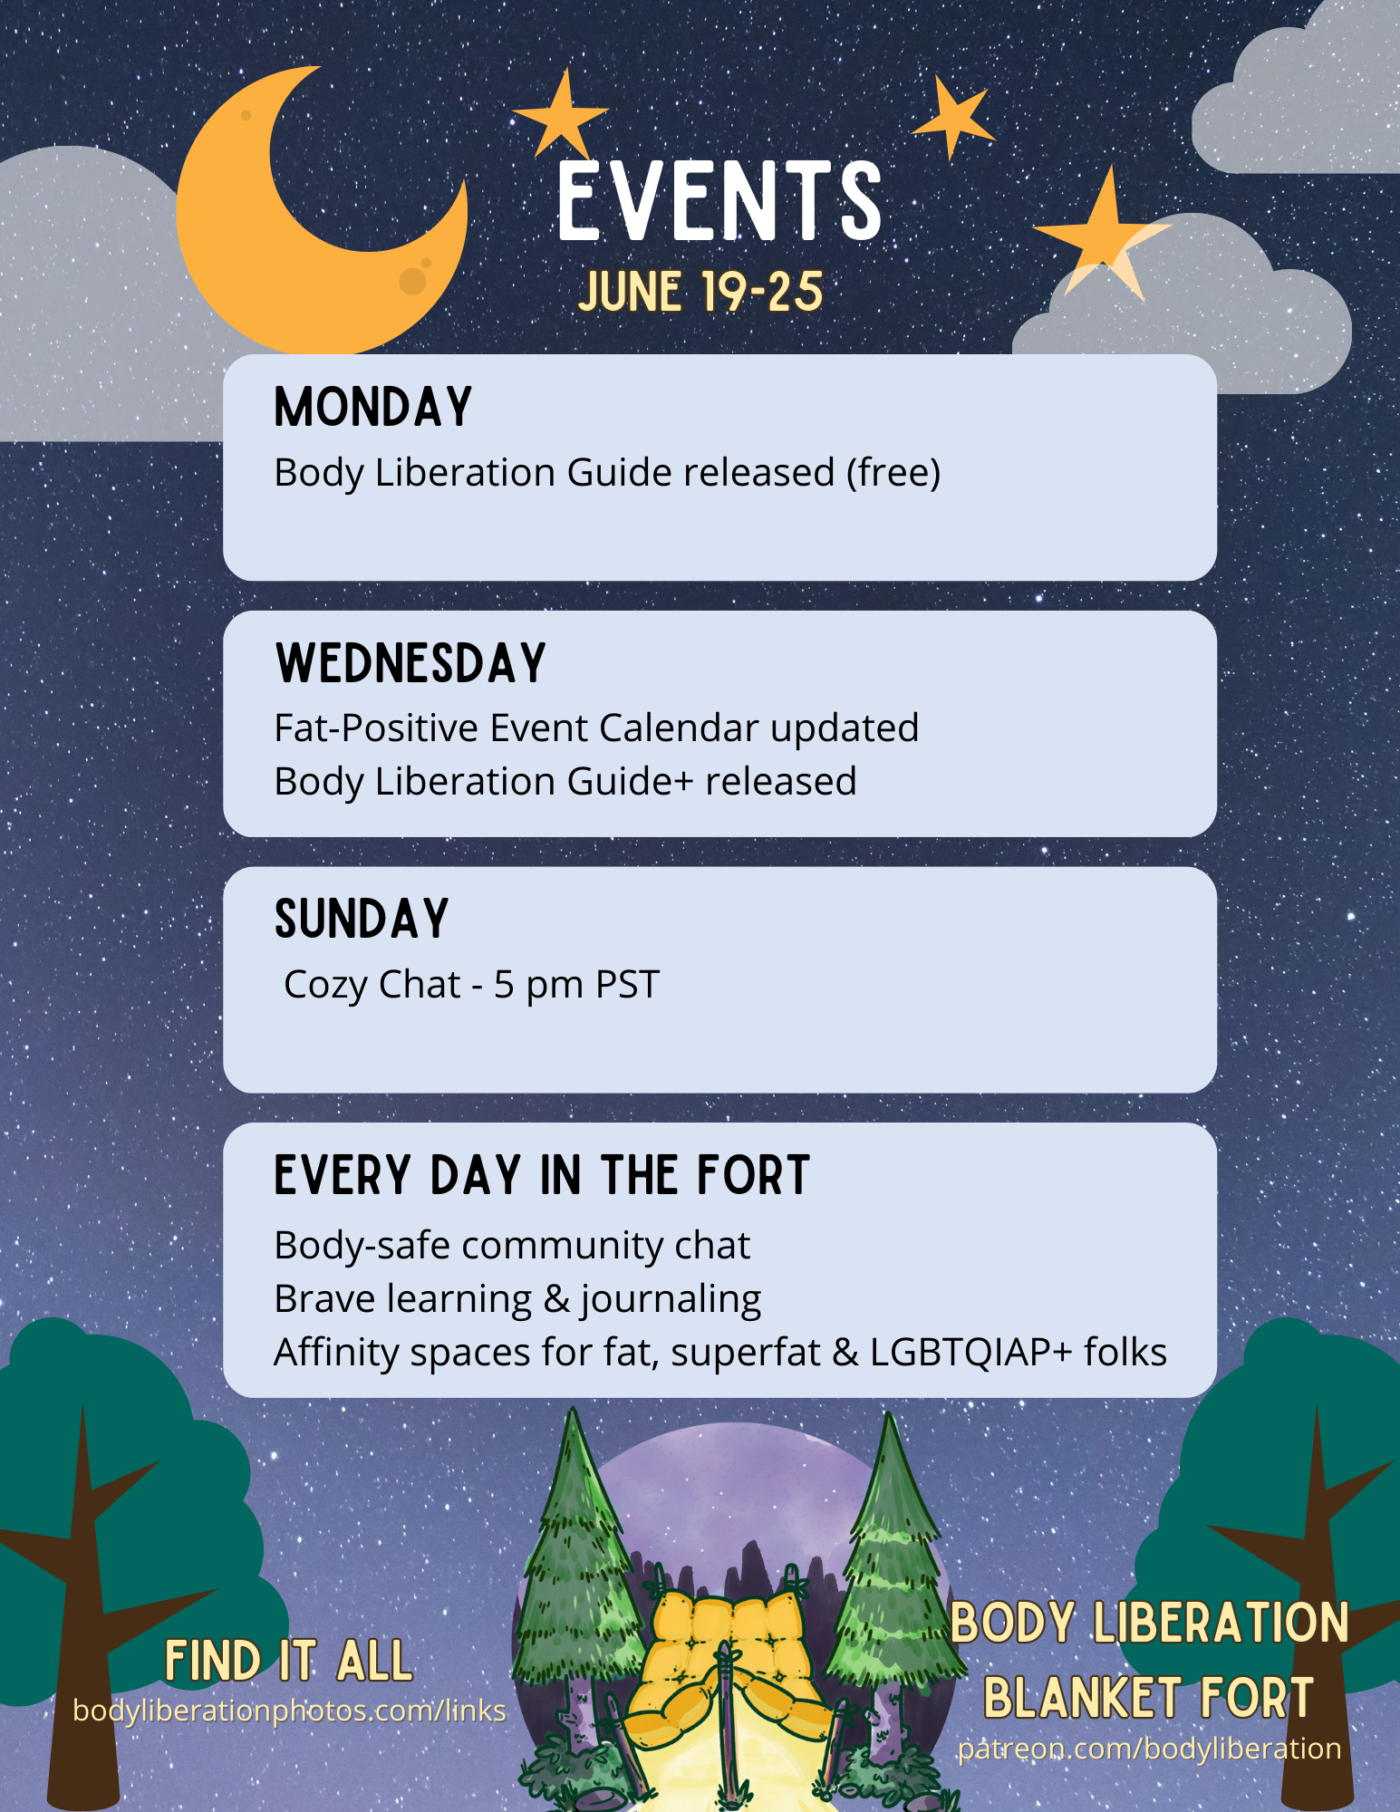 Next week's schedule for the Body Liberation Blanket Fort, a body-positive safer space